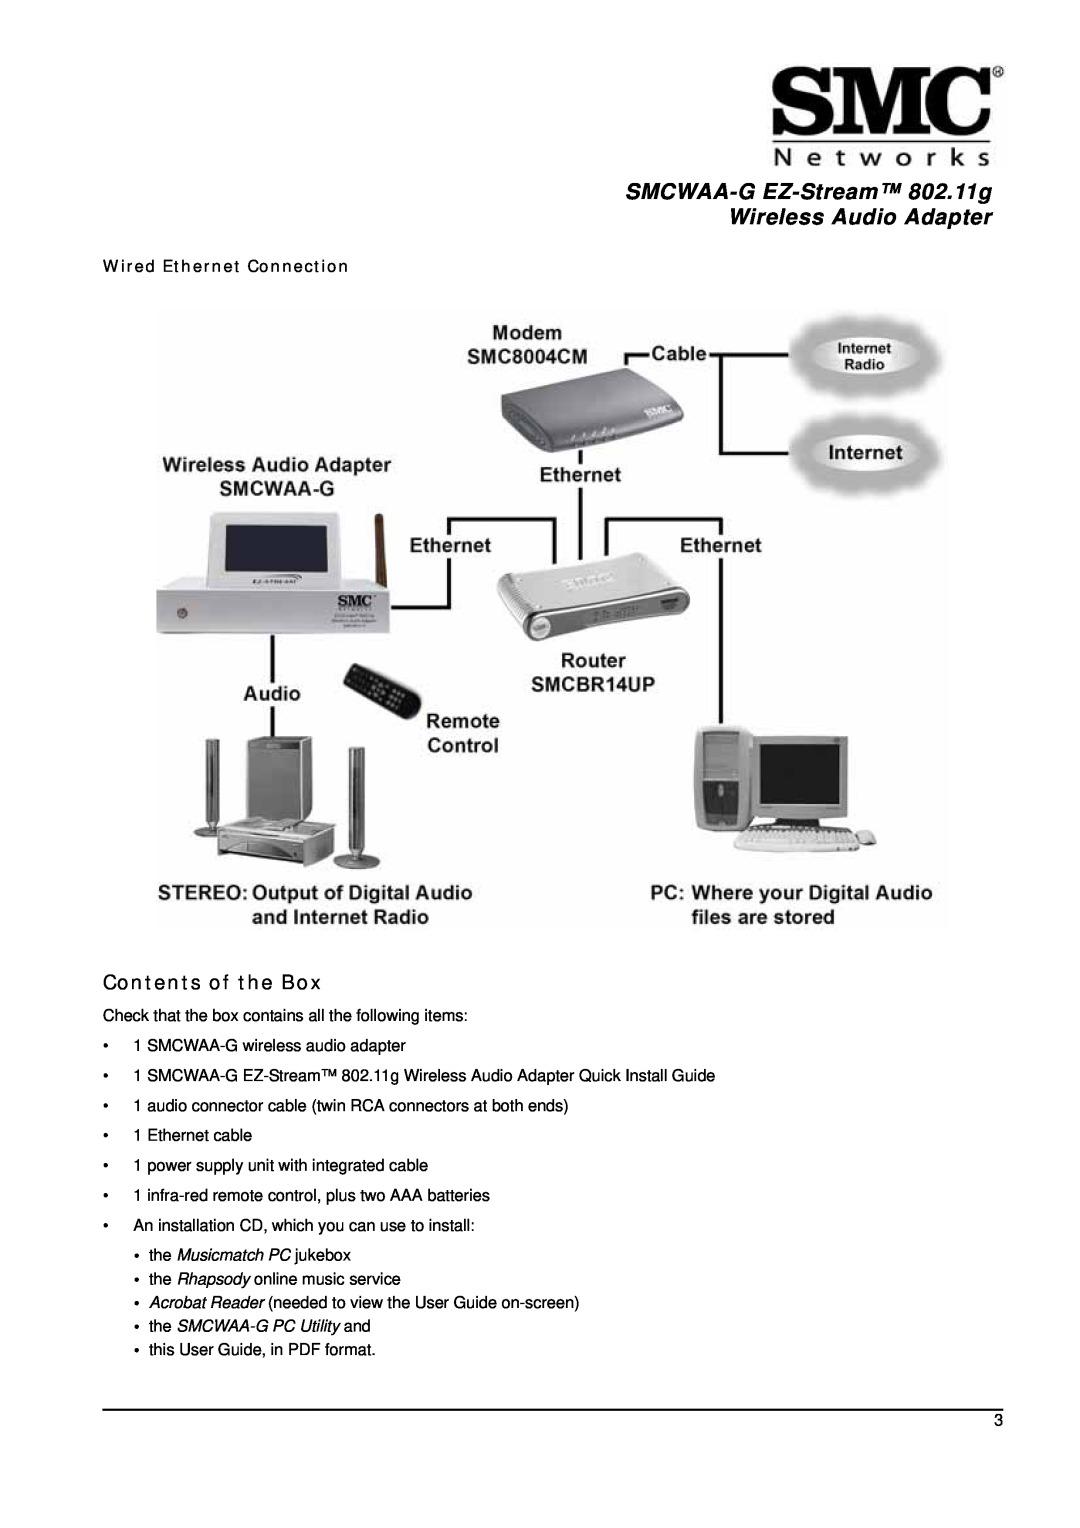 SMC Networks manual SMCWAA-G EZ-Stream 802.11g Wireless Audio Adapter, Contents of the Box, Wired Ethernet Connection 